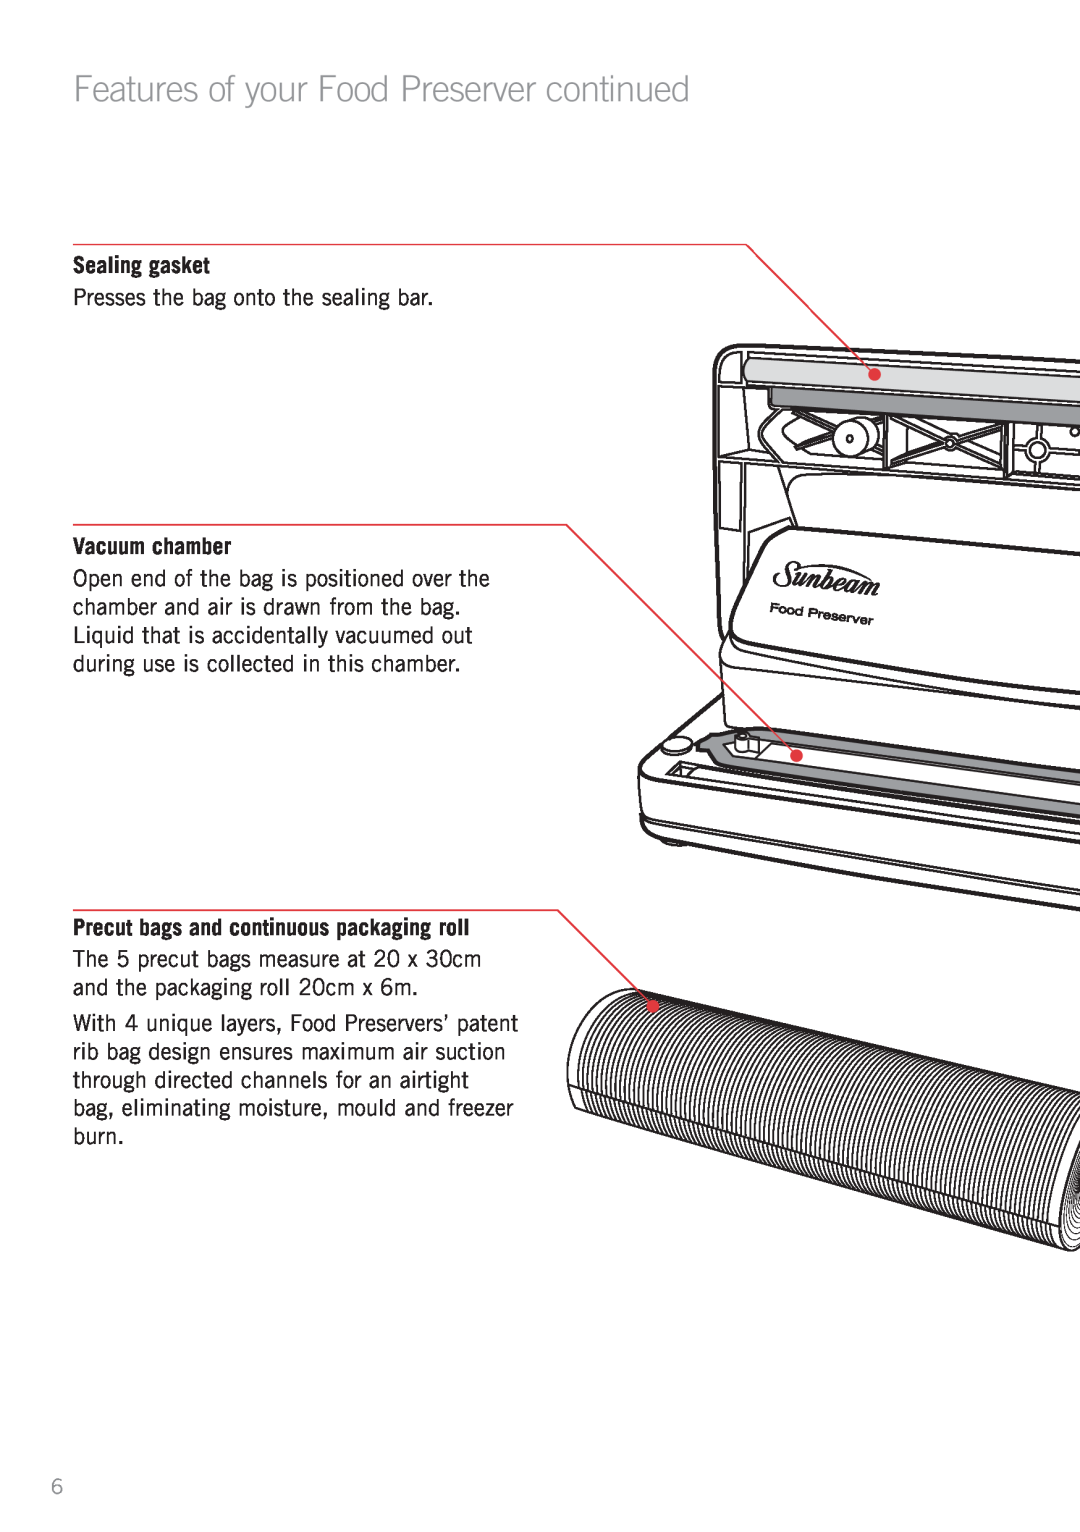 Sunbeam VS5200 manual Features of your Food Preserver continued, Sealing gasket, Vacuum chamber 